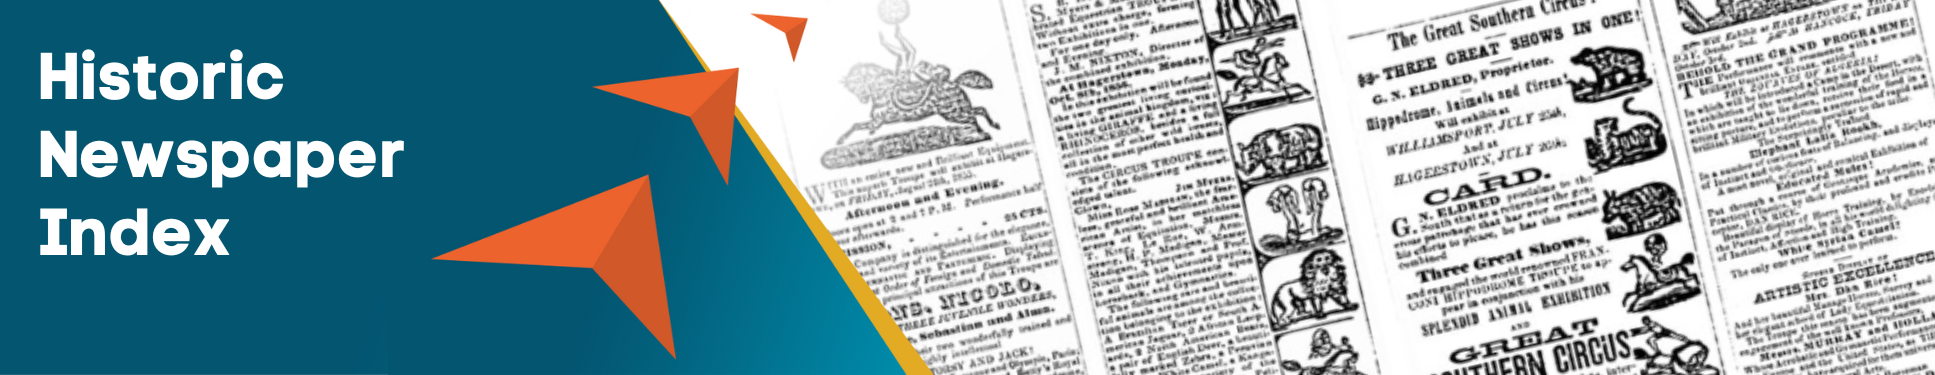 Historic Newspaper Index banner with three orange arrows pointing to old newspaper type.